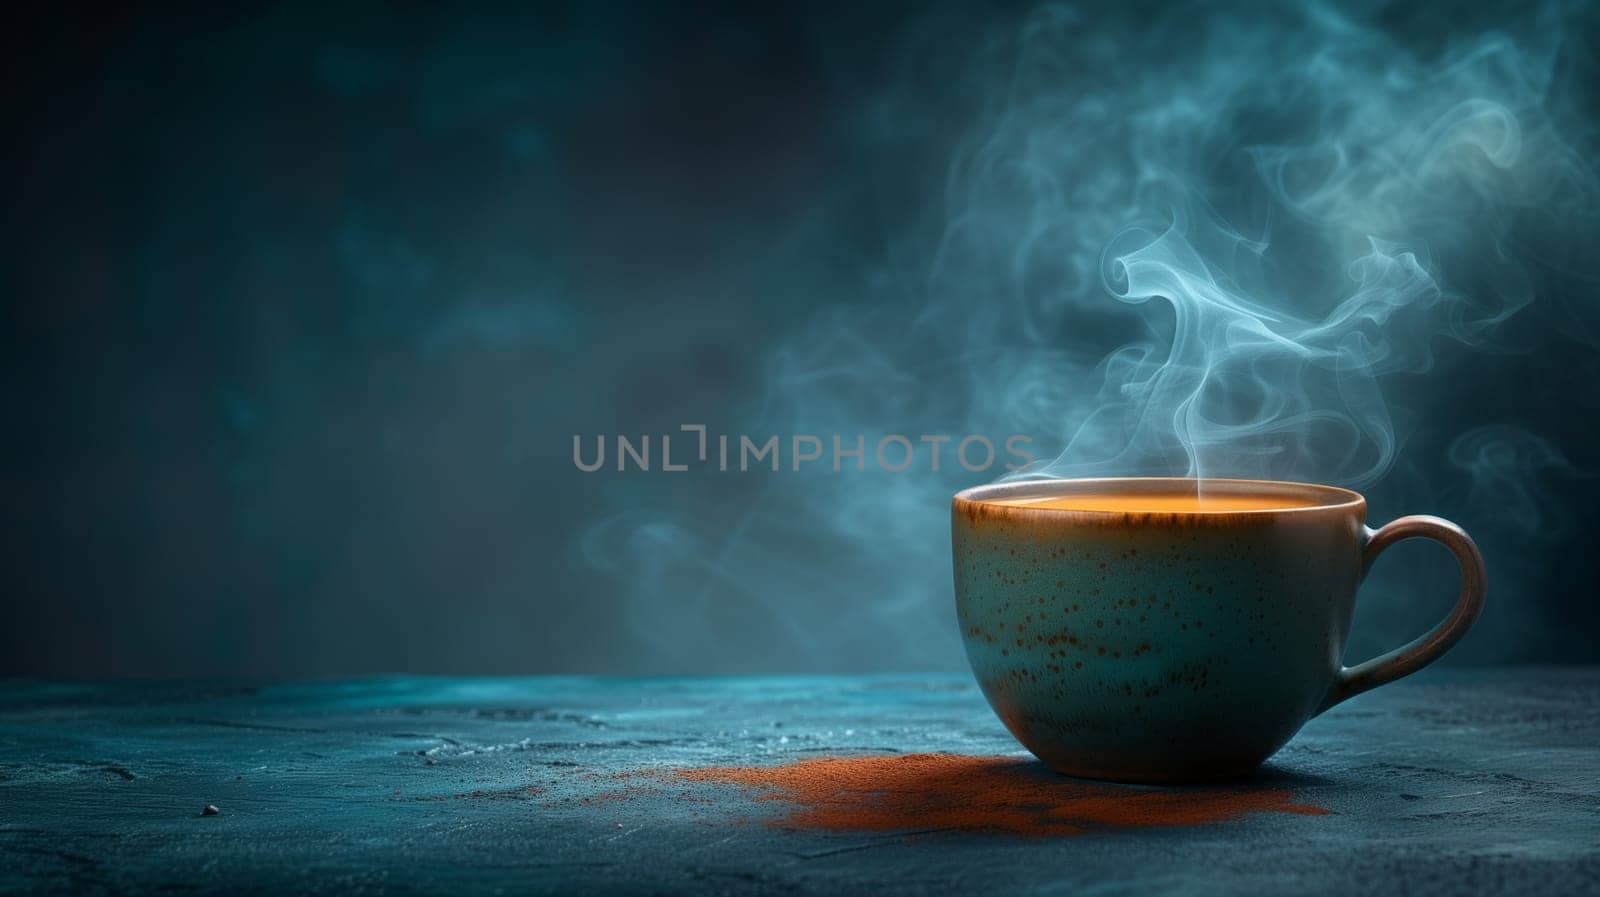 A steaming cup of coffee sits on a table, surrounded by sky blue tableware. The liquid inside the coffee cup is hot and inviting